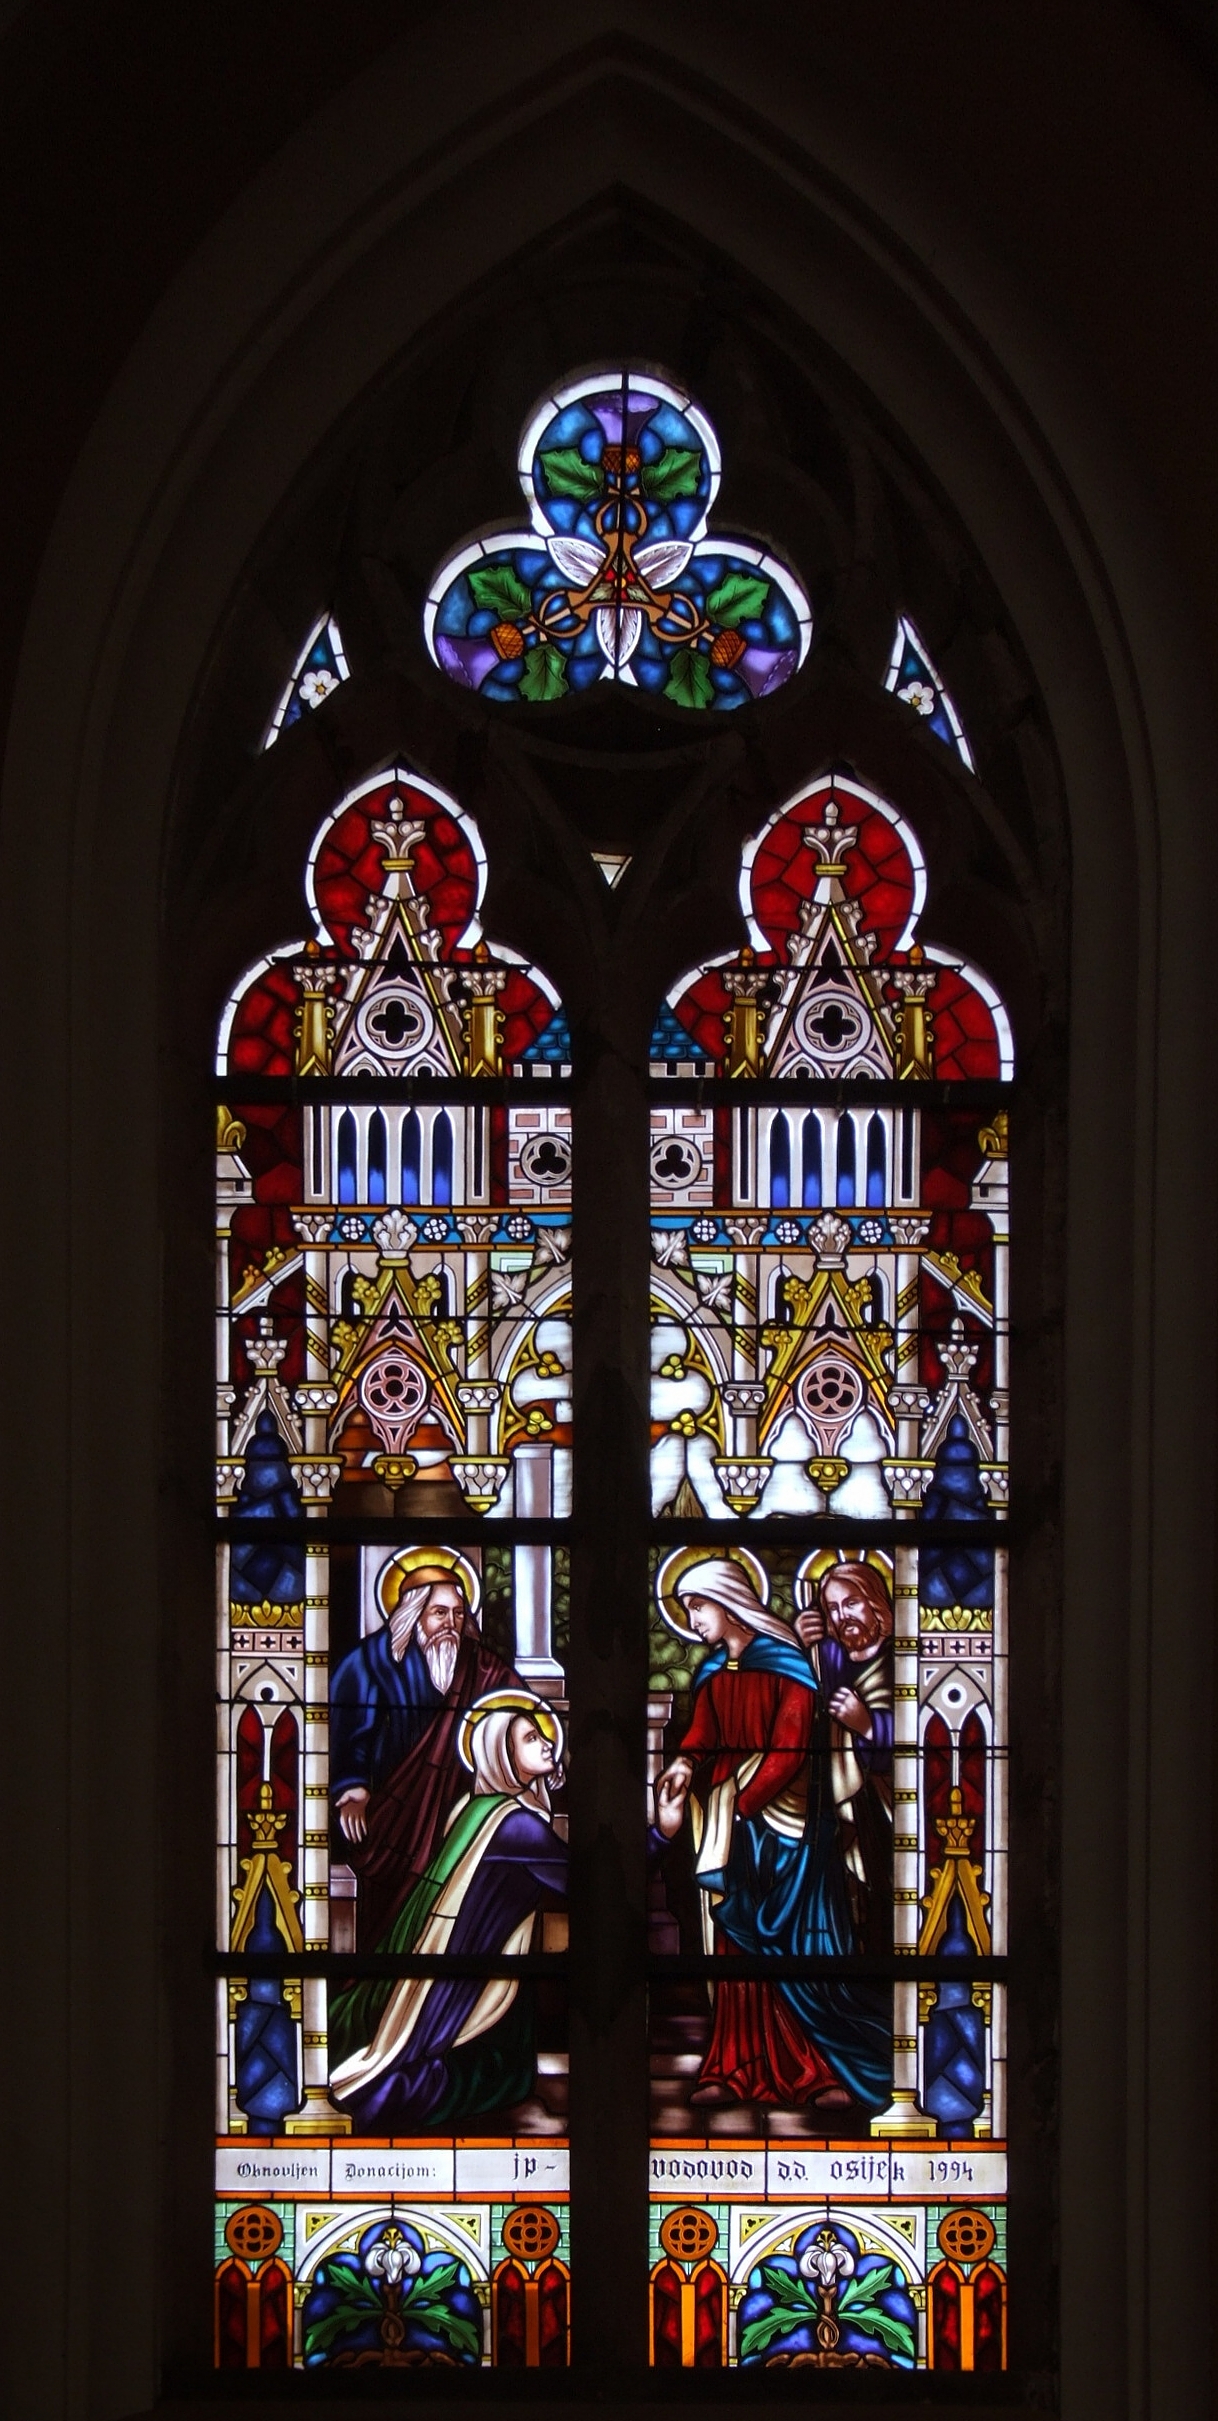 Stained glass window in Osijek cathedral